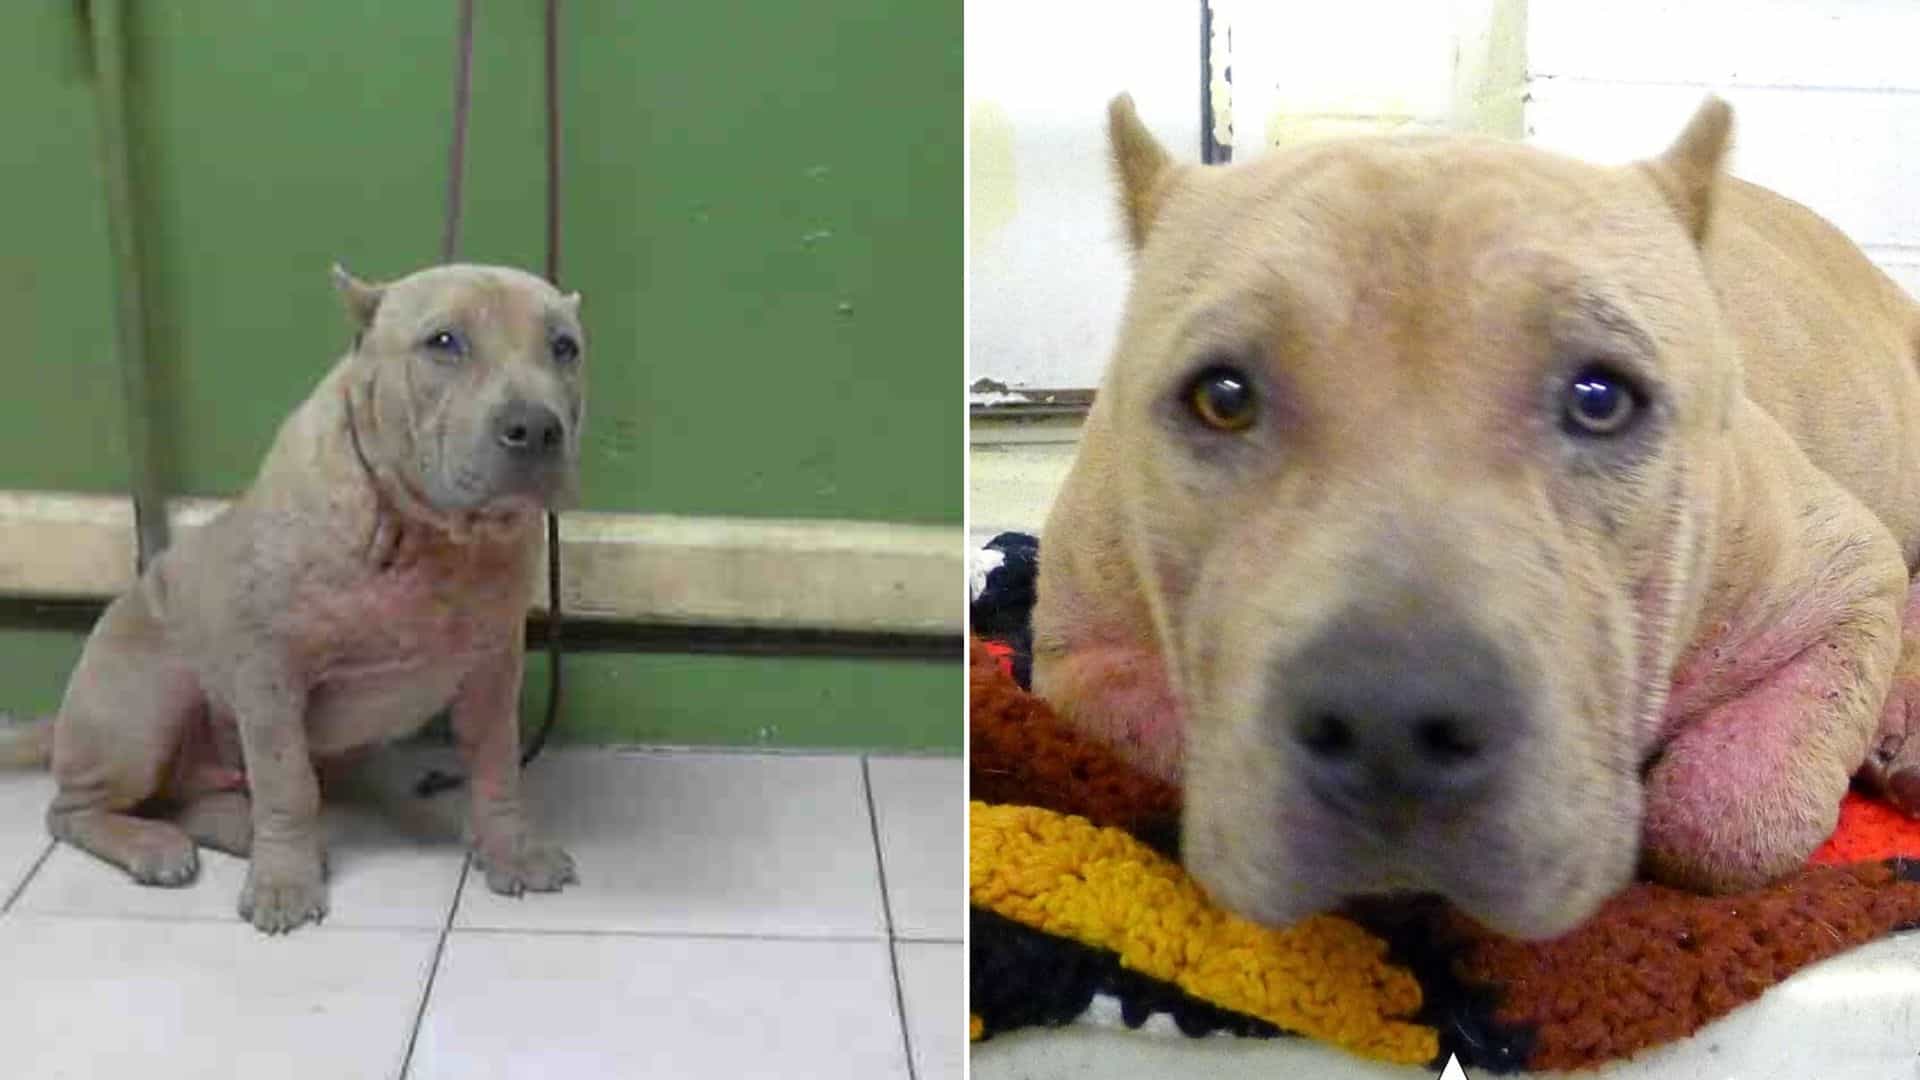 Unadoptable Shelter Dog With Serious Health Issues Finally Finds A Forever Home